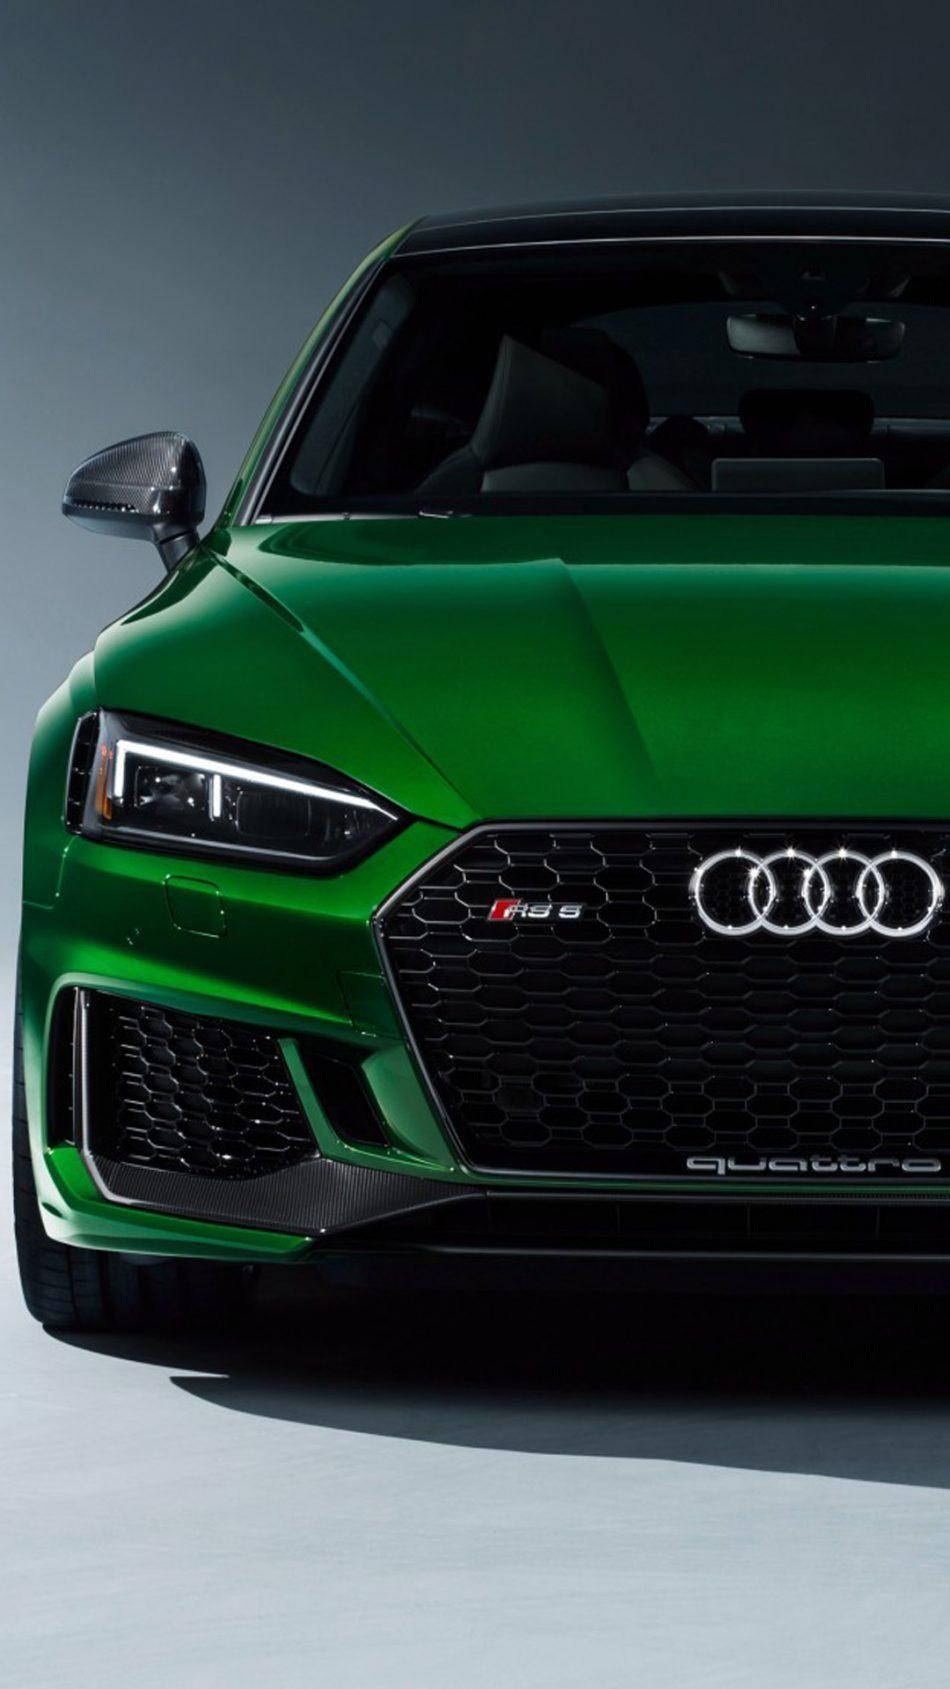 Caption: Striking Green 2019 Audi Rs 5 In High Definition